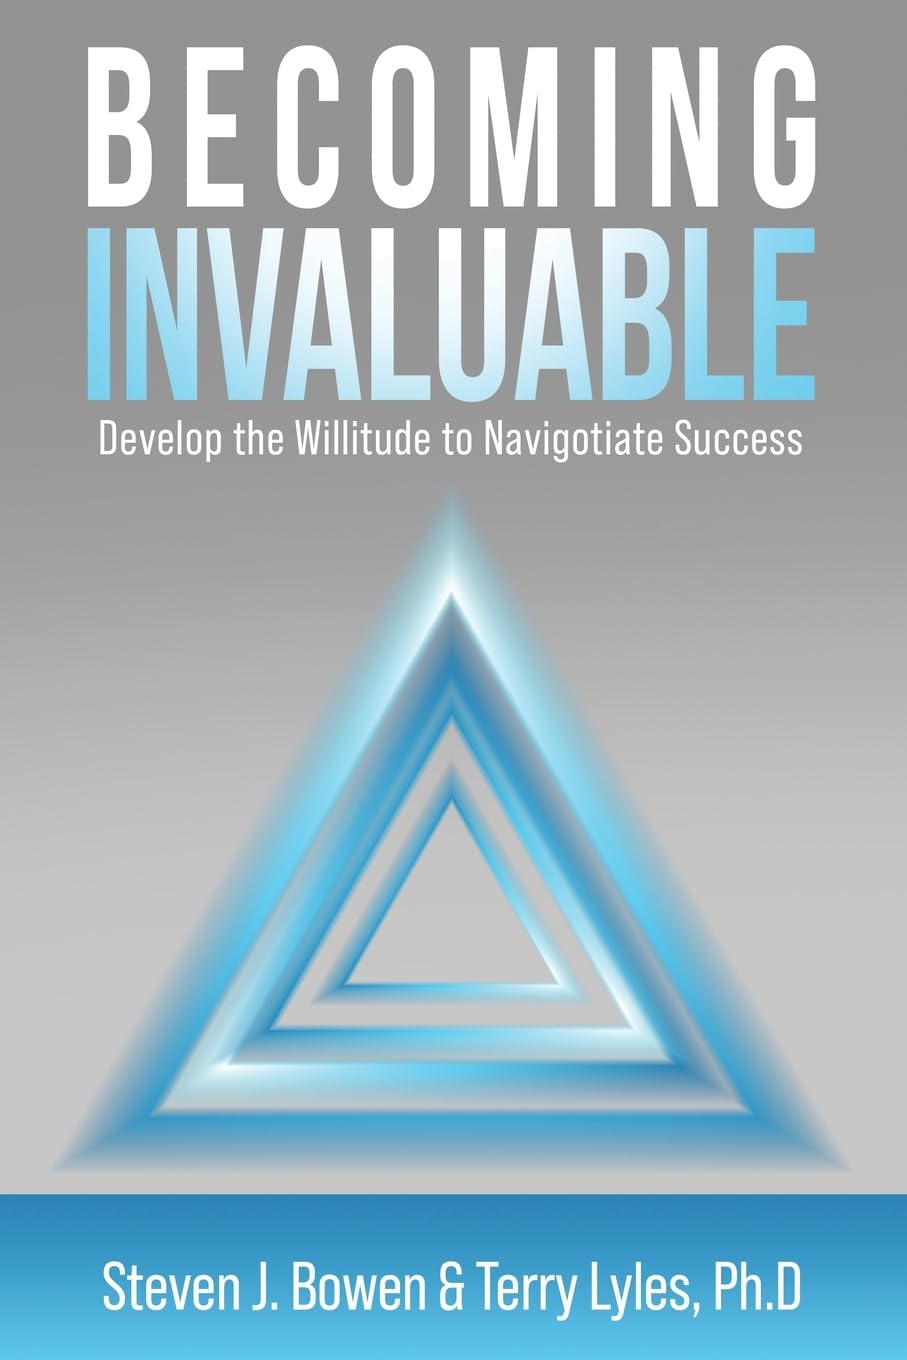 New book "Becoming Invaluable" by Steven J. Bowen and Terry Lyles, Ph.D. is released, an empowering guide to attracting and maximizing opportunities for individuals and organizations